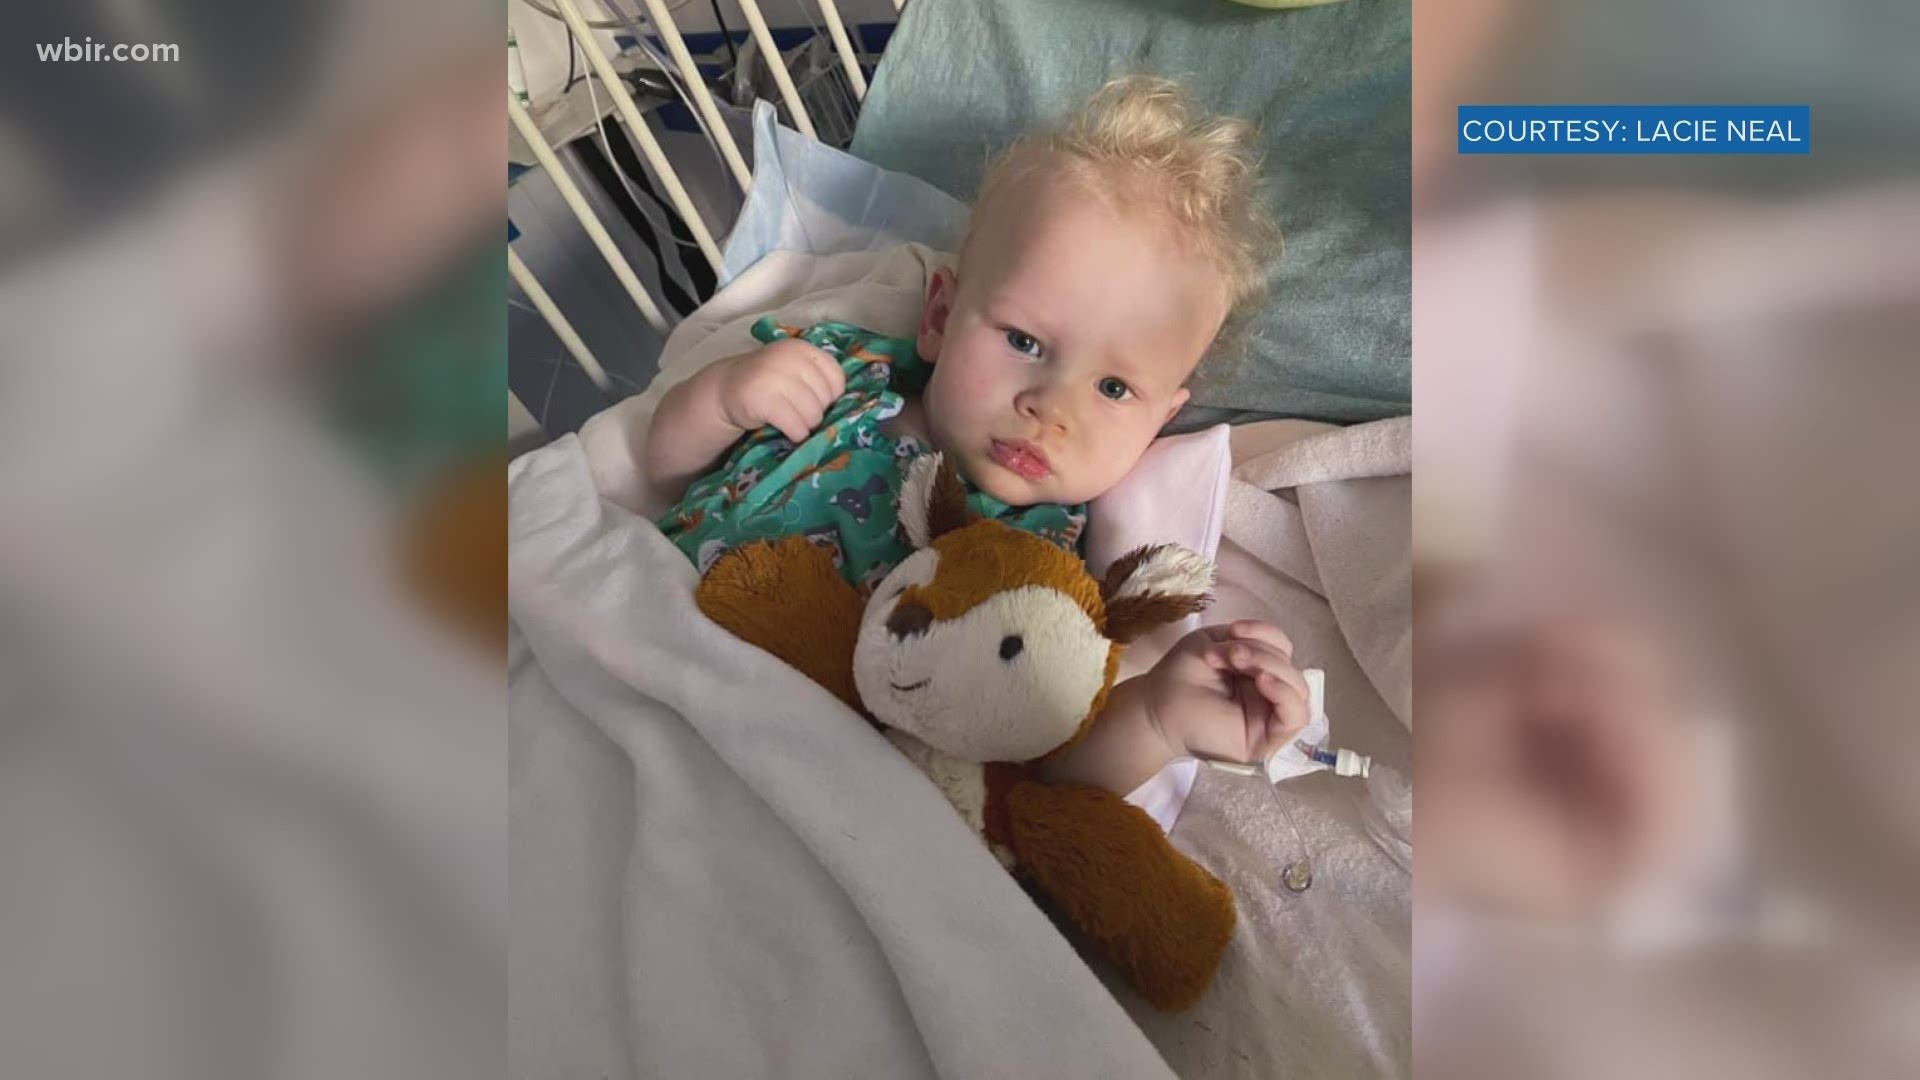 A 1-year-old who nearly drowned in a fish pond in Cumberland County will soon be out of the hospital.